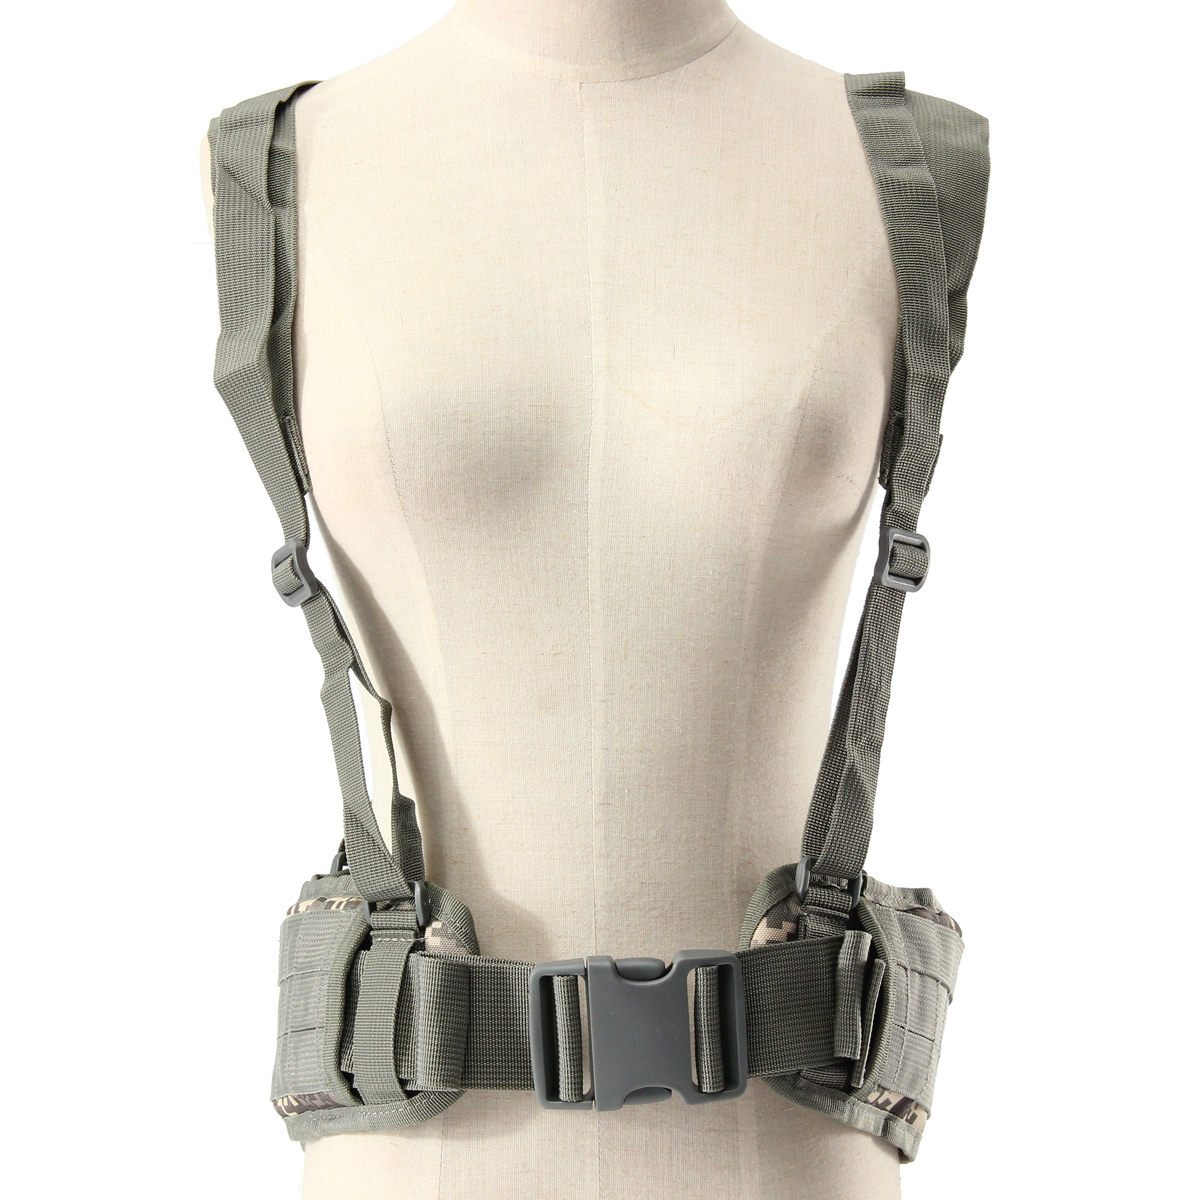 Military-Nylon-Molle-Waist-Combat-Belt-With-Harness-Tactical-Adjustable-Soft-Padded-Universal-Unisex-1817236-1